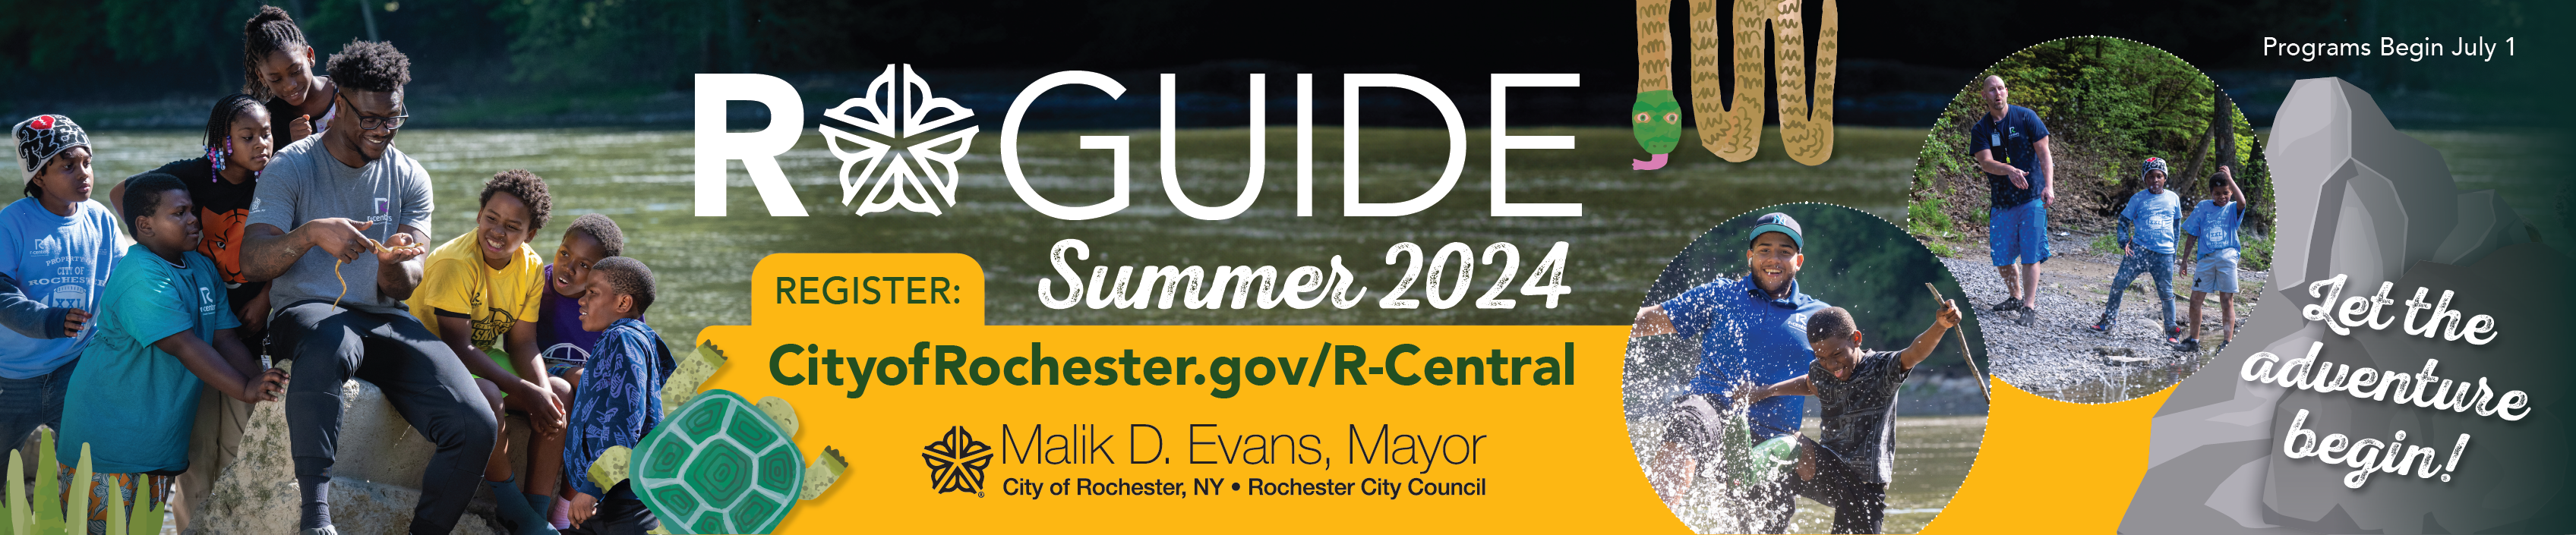 Graphic web banner for Summer 2024 R-Guide